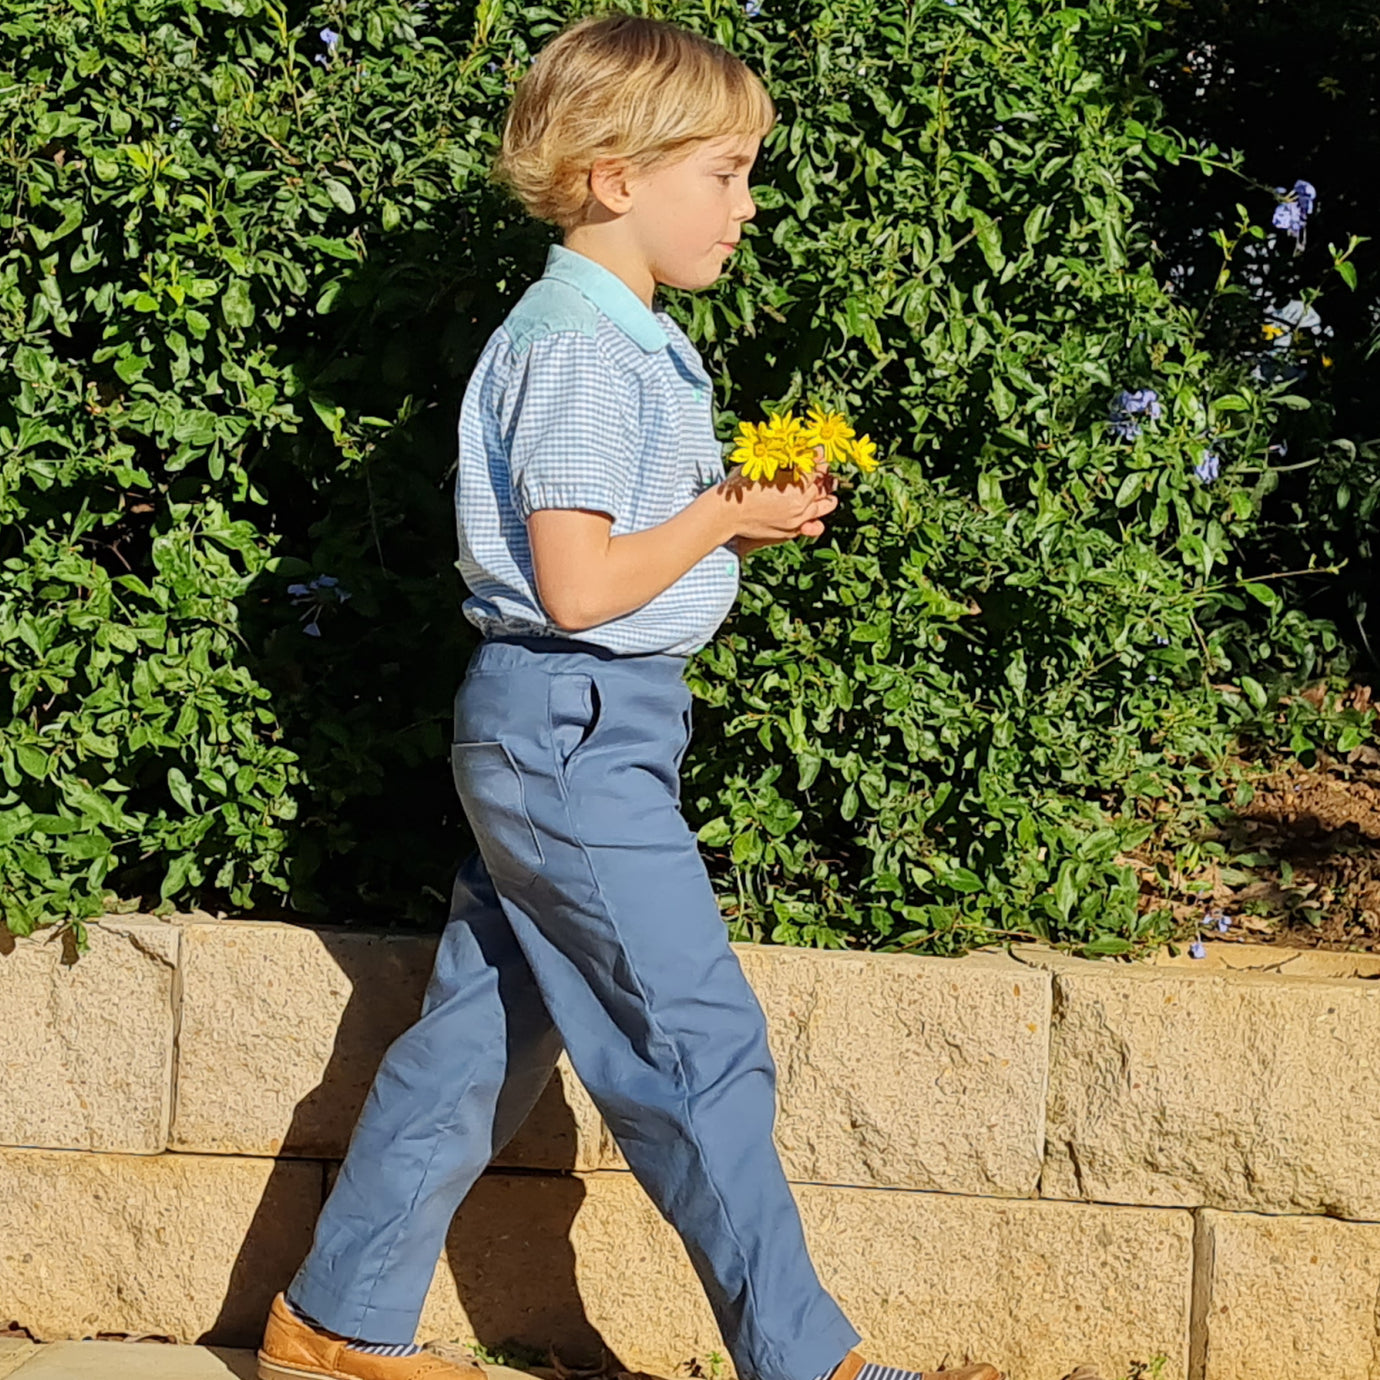 Child wearing the Children's Woven Pants sewing pattern from Wardrobe by Me on The Fold Line. A pull-on trouser pattern made in cotton, light canvas, denim or linen fabrics, featuring an elastic waist, straight leg, side and back pockets and decorative fr